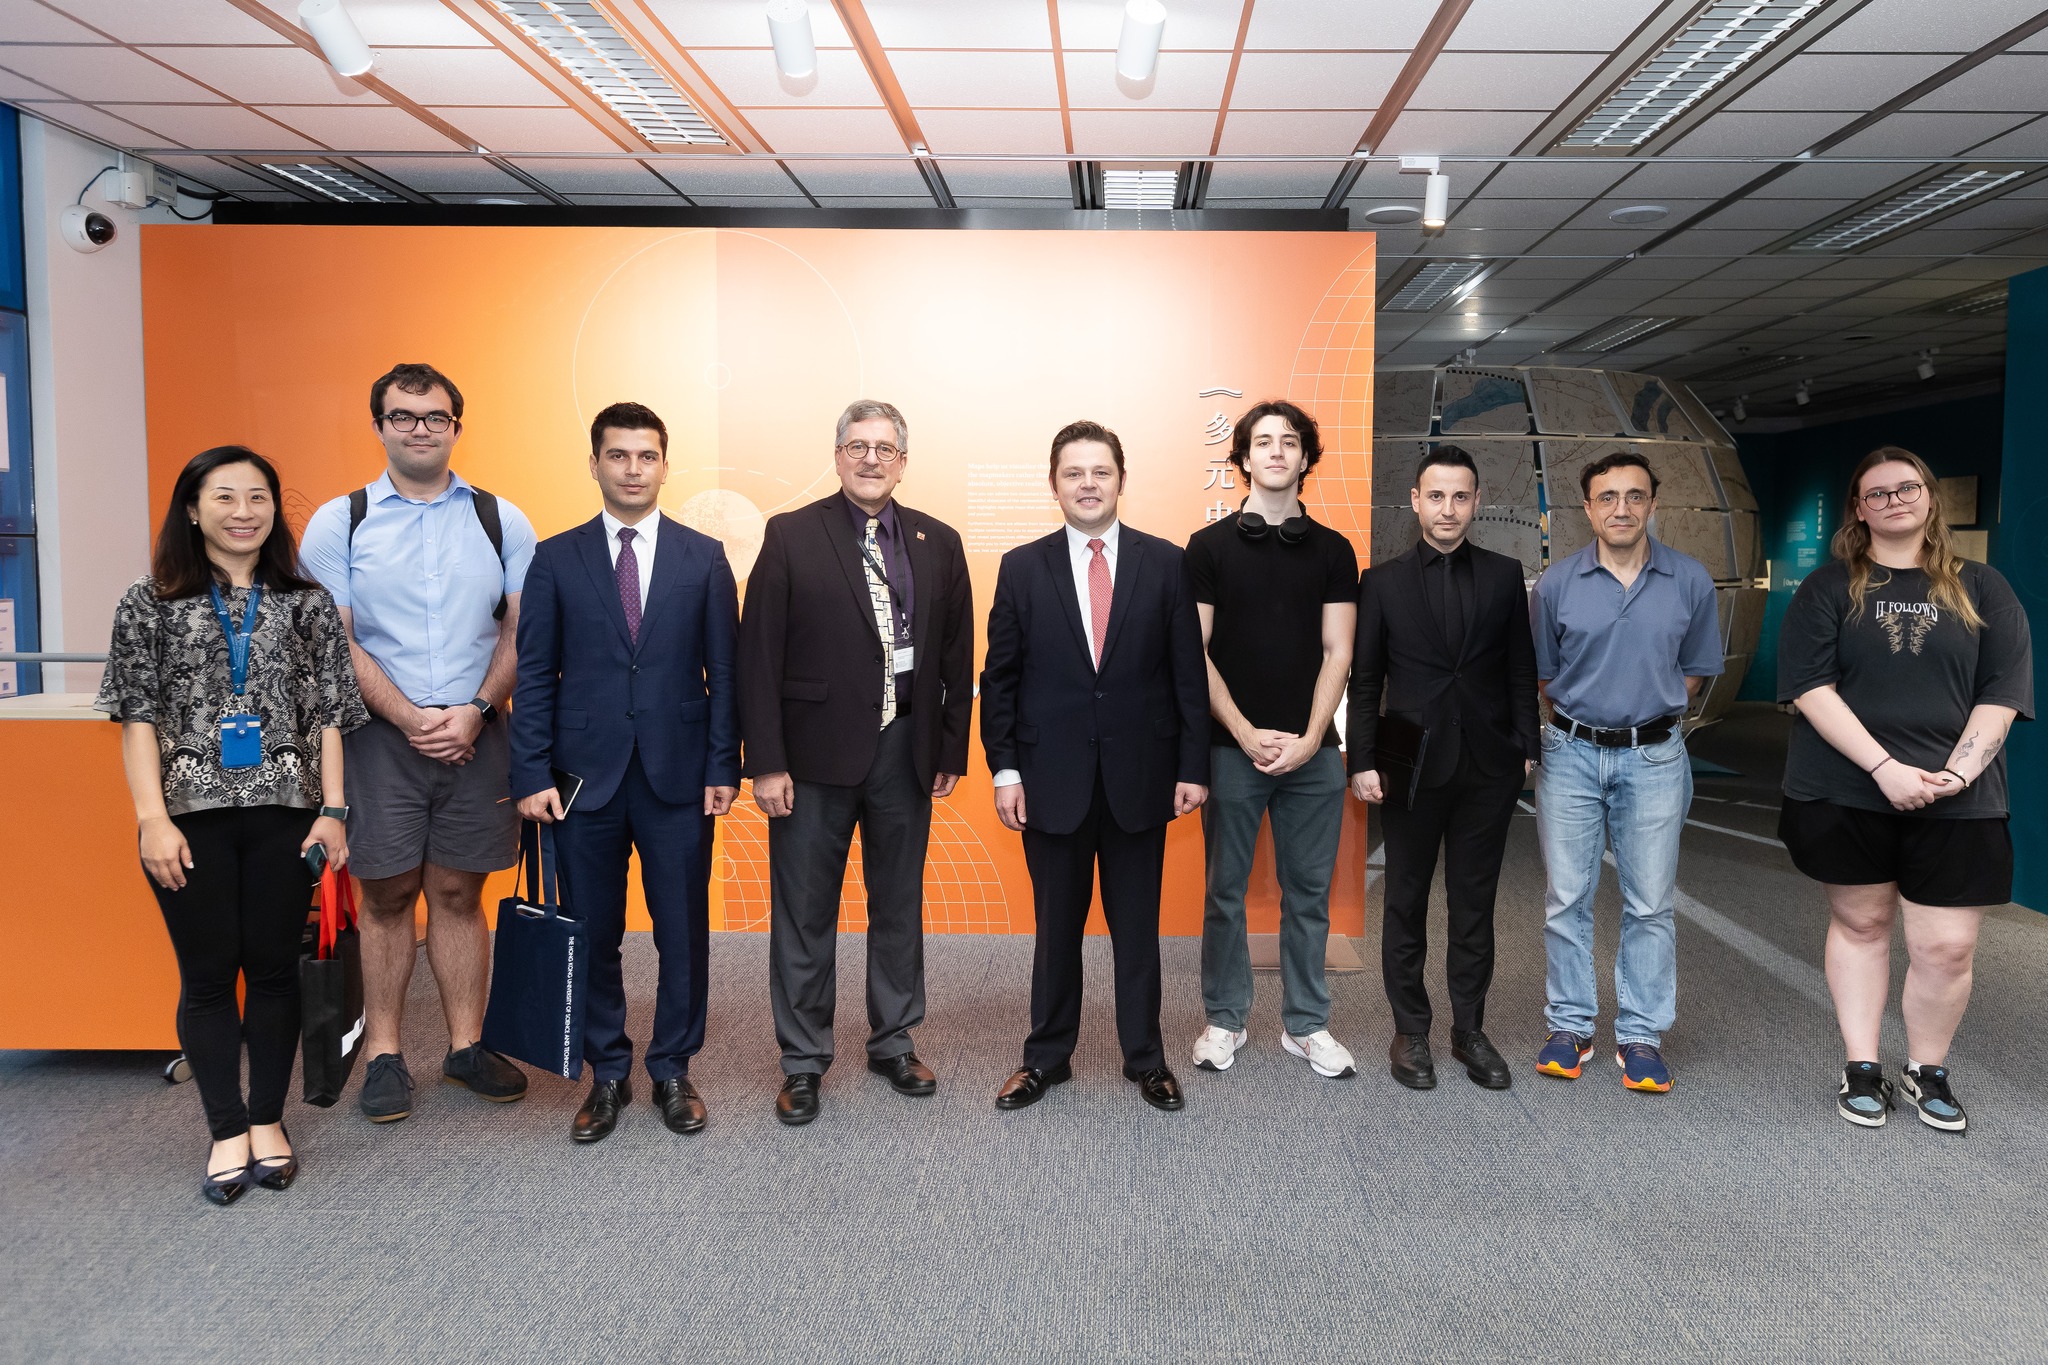 Consul General Evcin (center) and his delegation take a group photo with the HKUST team.